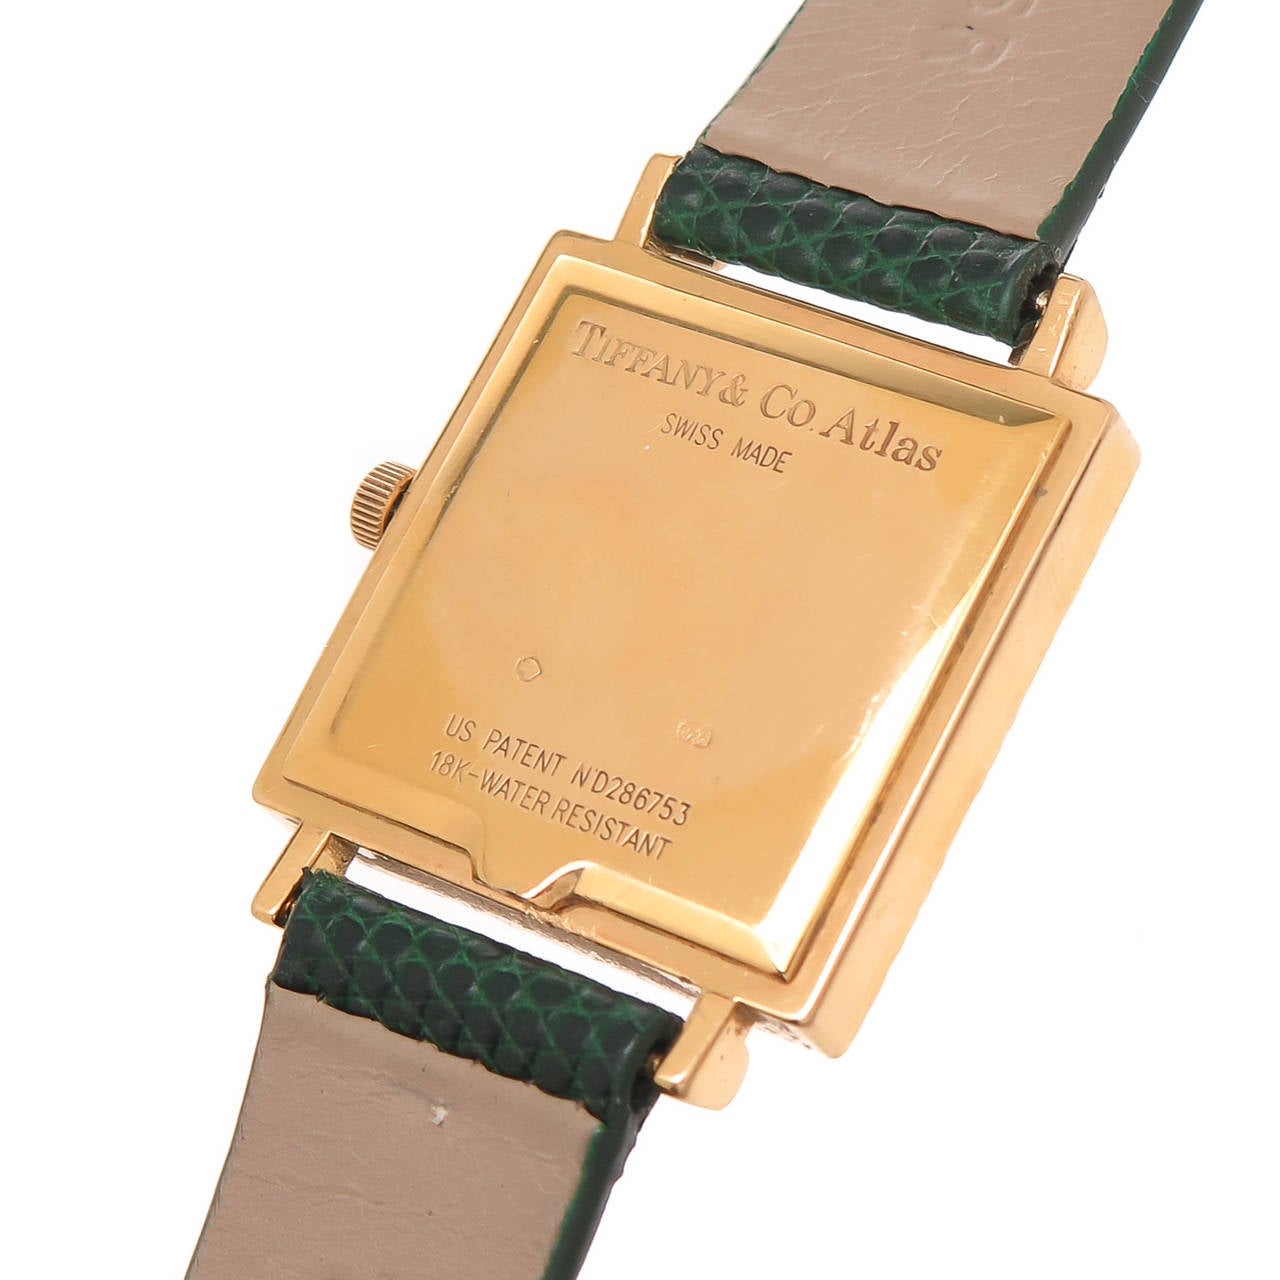 Circa 1990s 18K yellow gold Tiffany & Co. lady's wristwatch from the Atlas collection. Measuring 1 X 1 inch square and 3/16 inch thick with raised Roman numerals around the bezel, quartz movement and gold dial. Original green lizard strap with gold